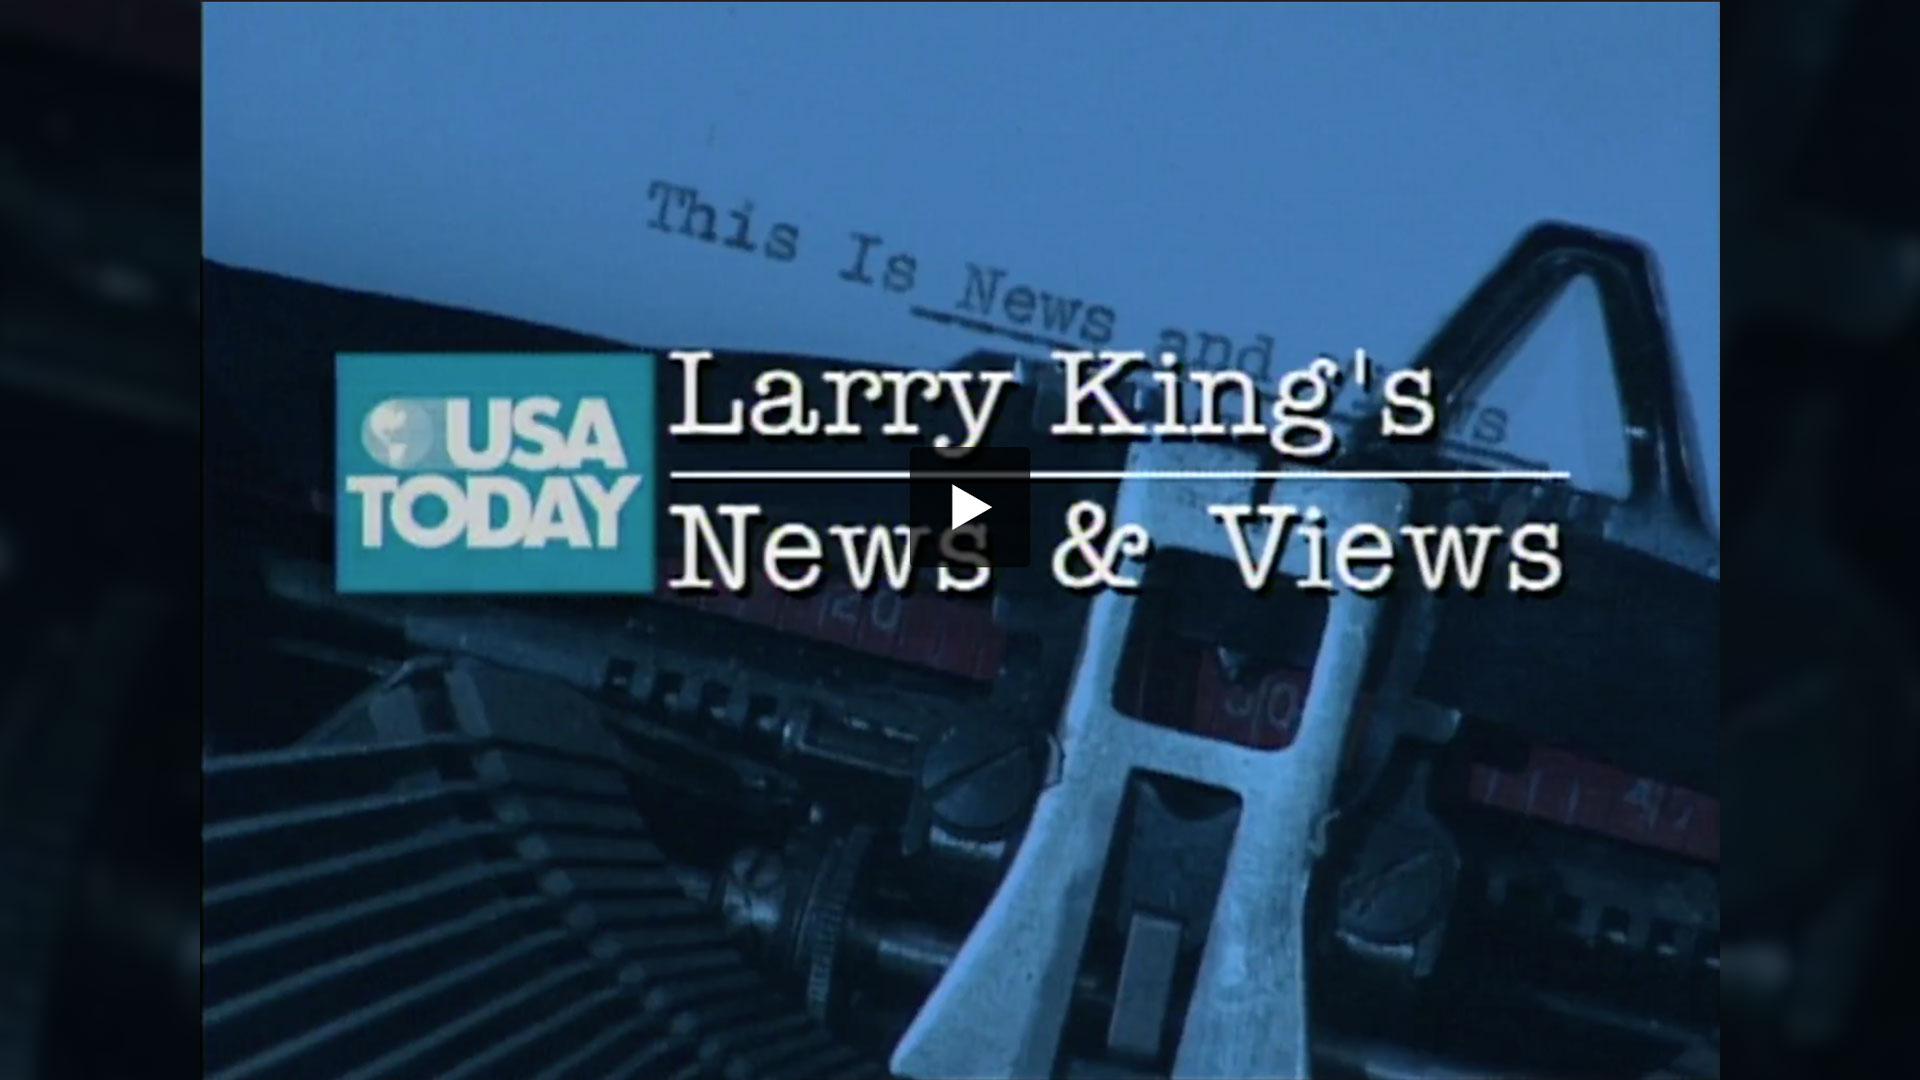 Larry King's News and Views